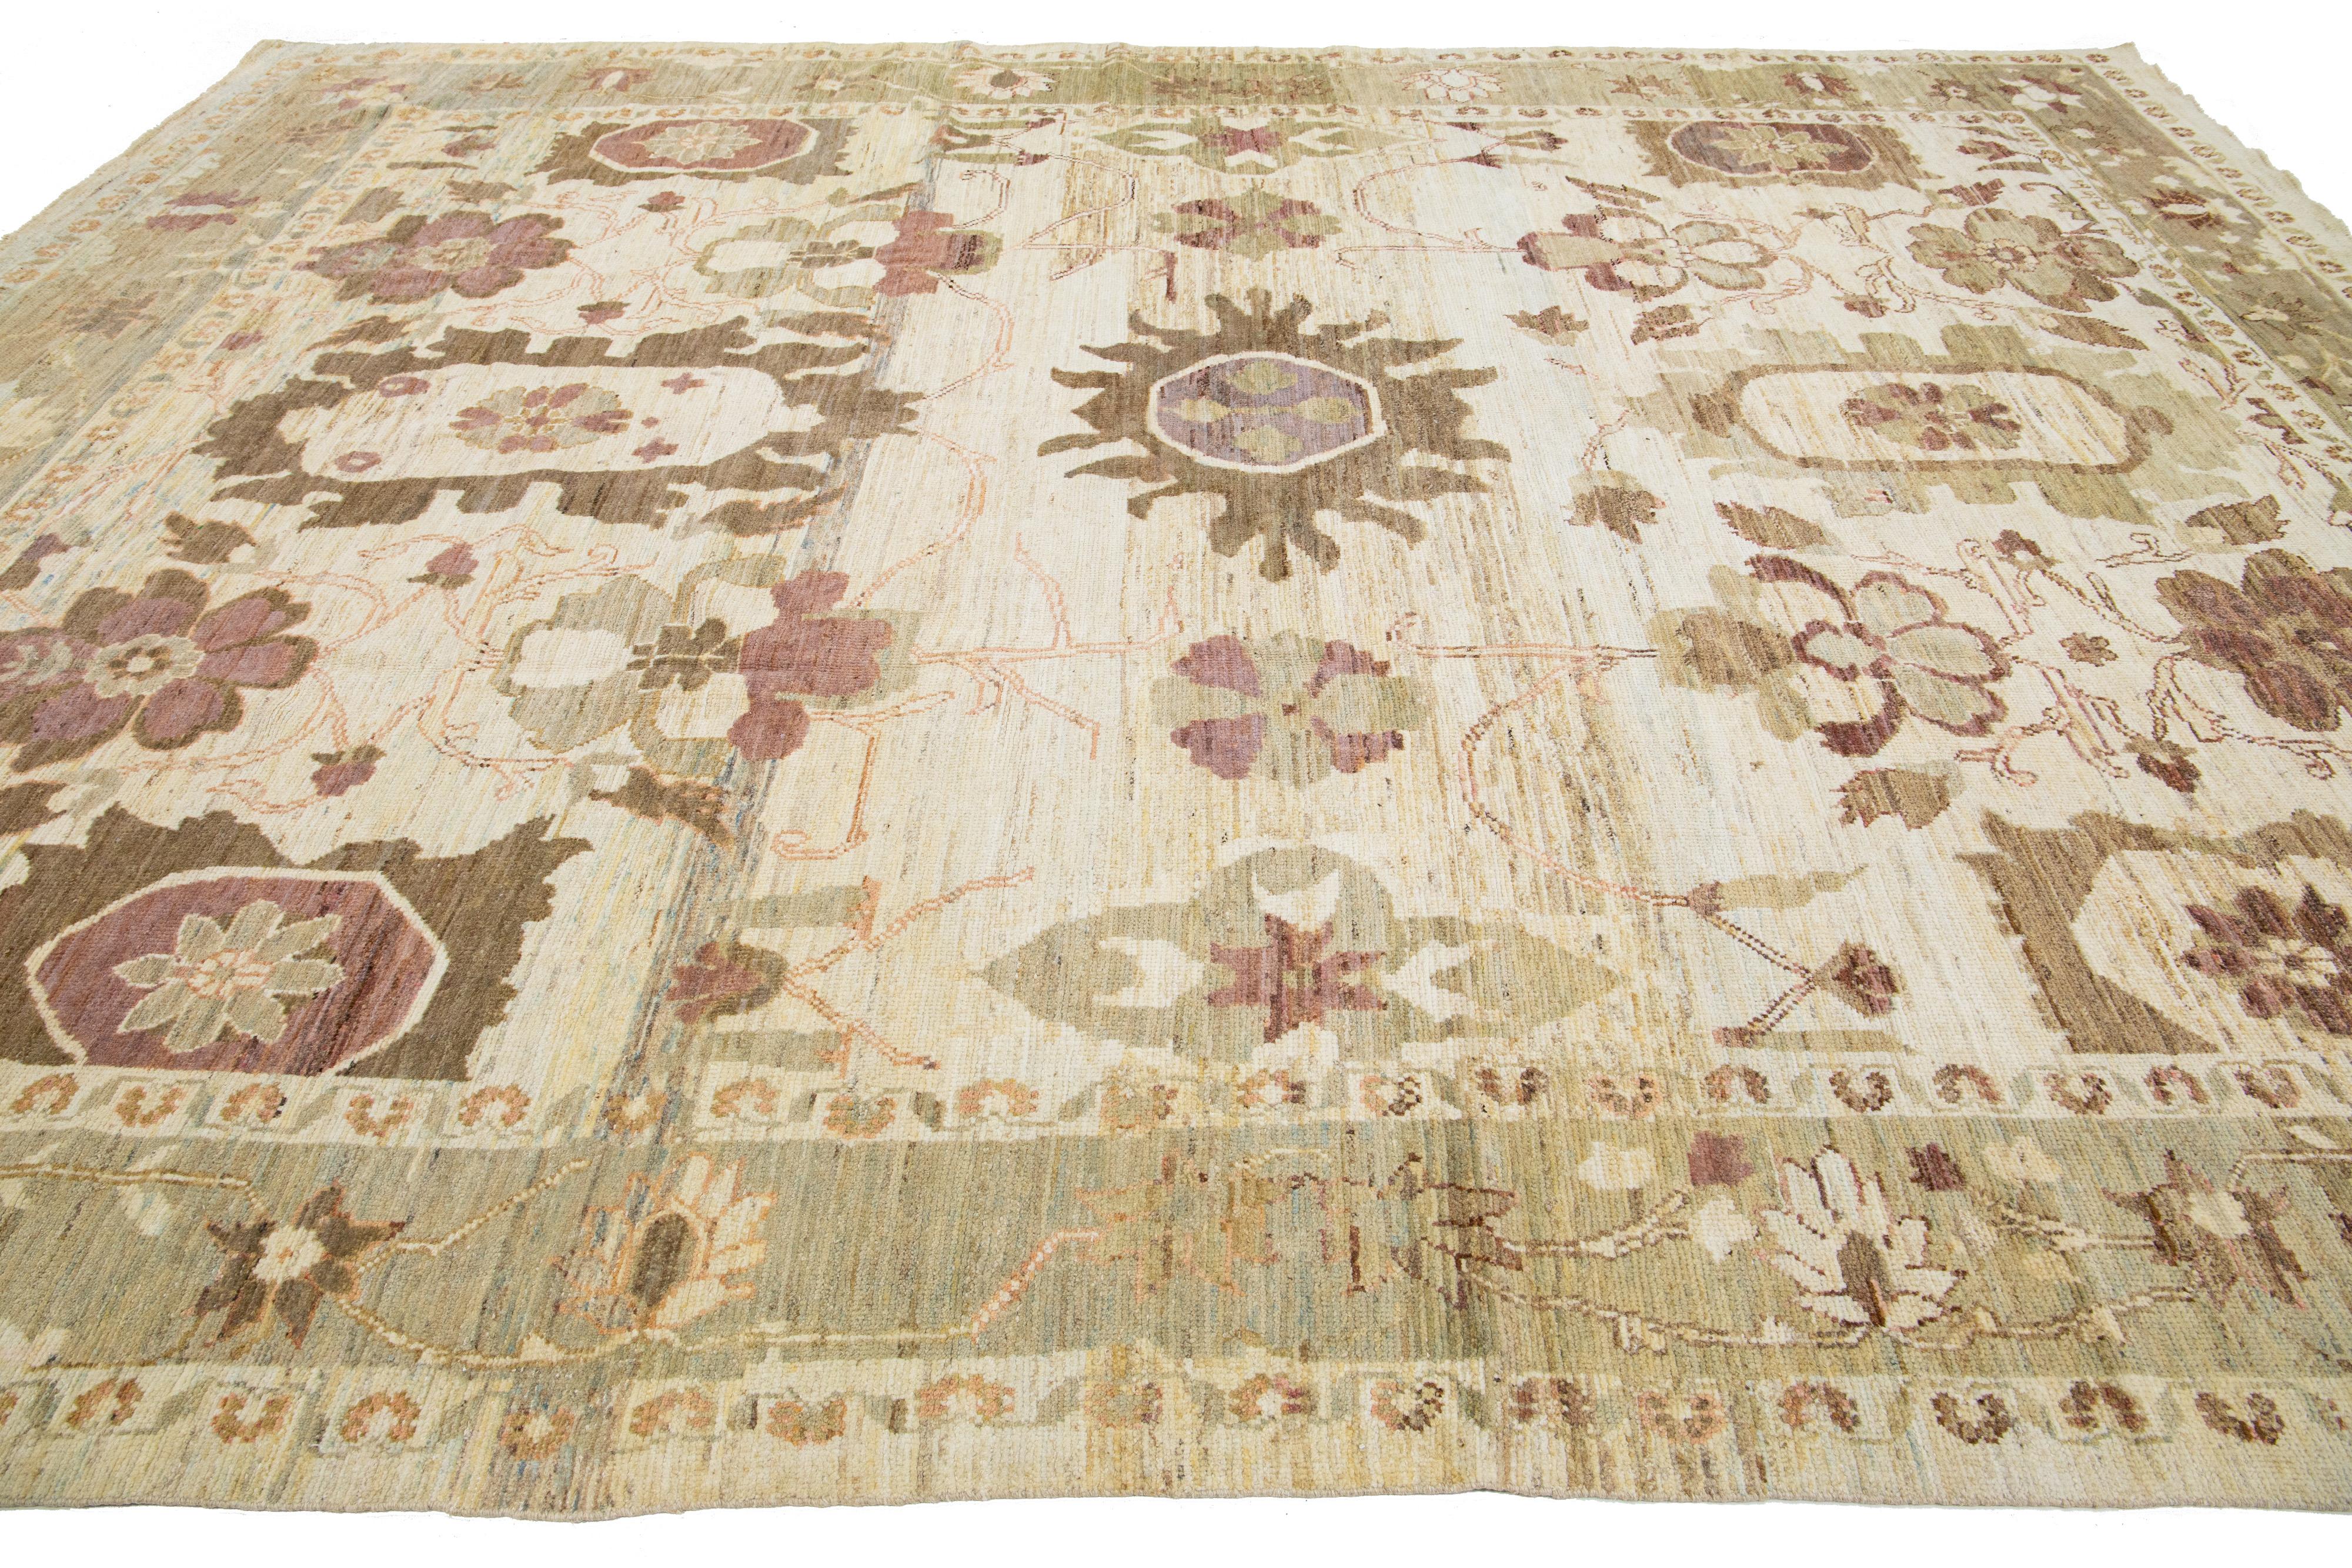 Hand-Knotted Allover Floral Contemporary Oushak style Handmade Wool Rug In Beige For Sale